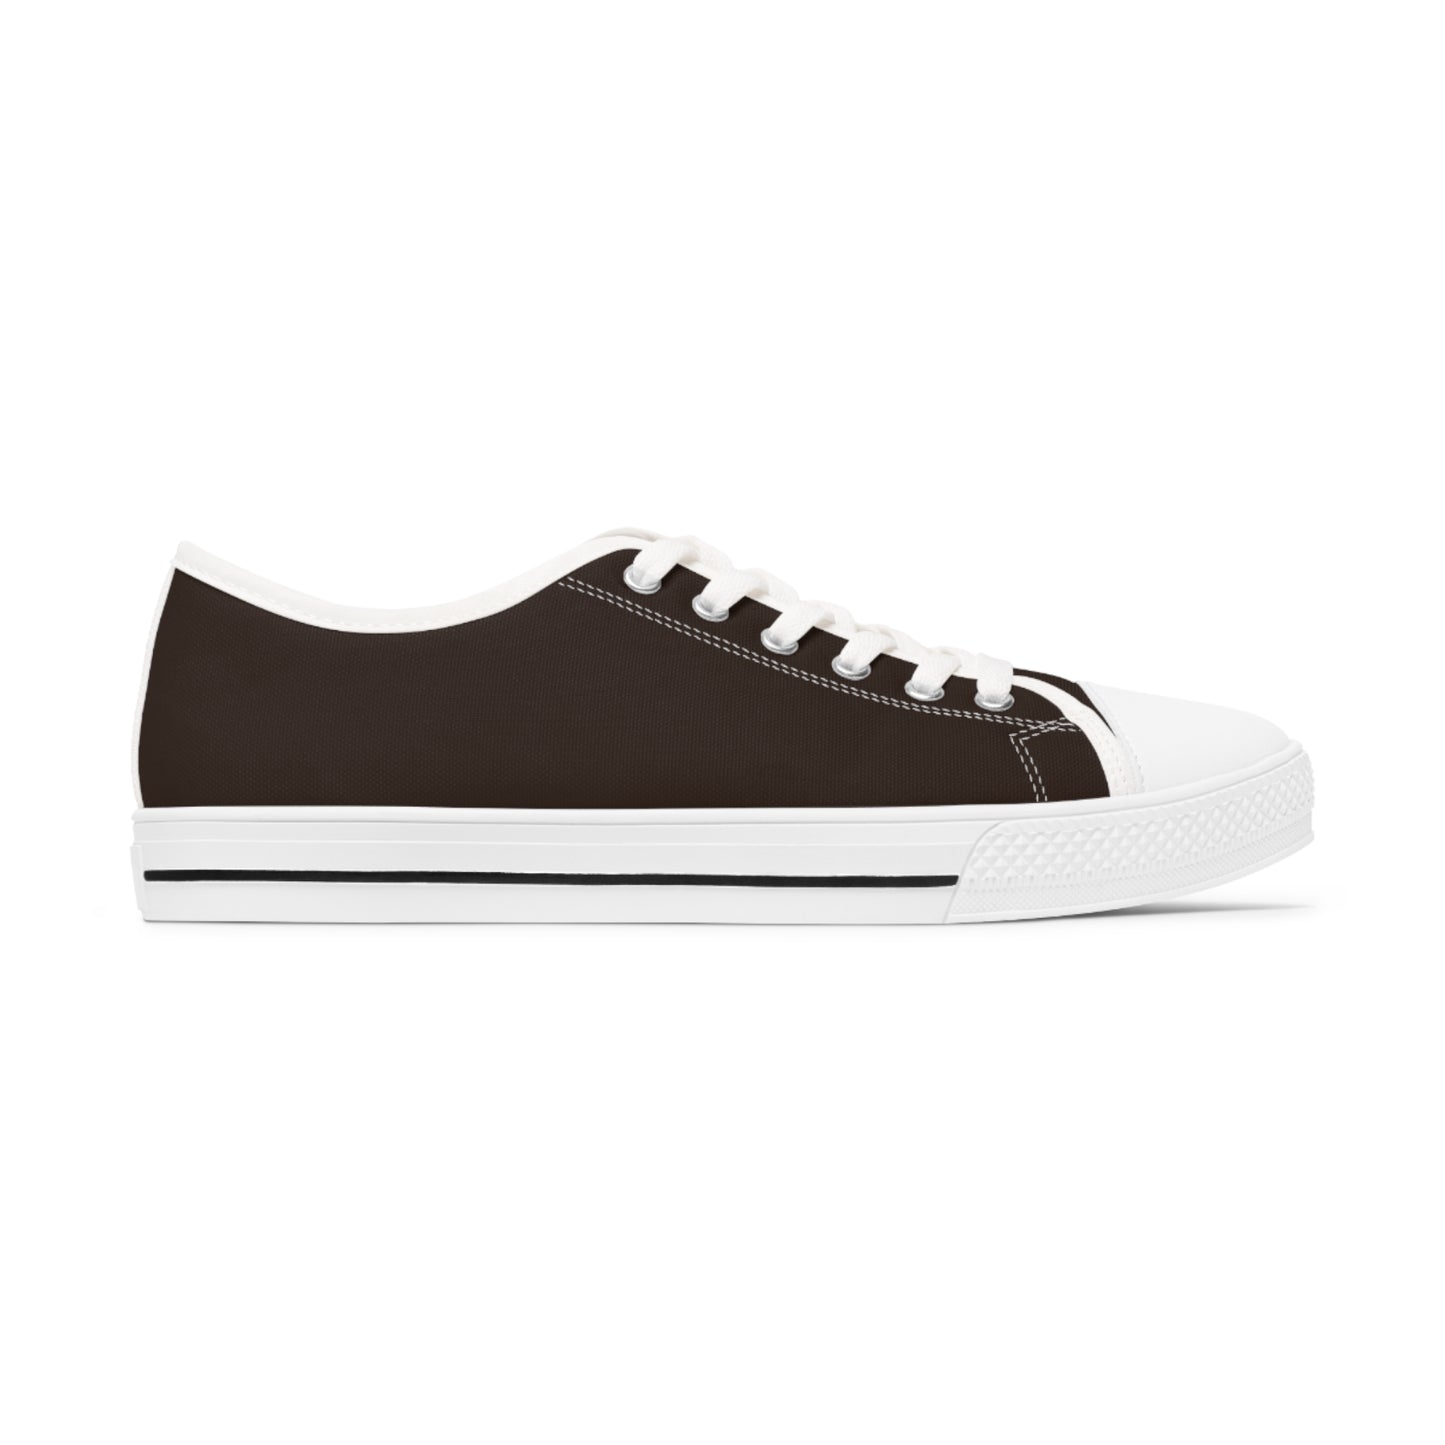 Women's Canvas Low Top Solid Color Sneakers - Chocolate Cherry US 12 White sole